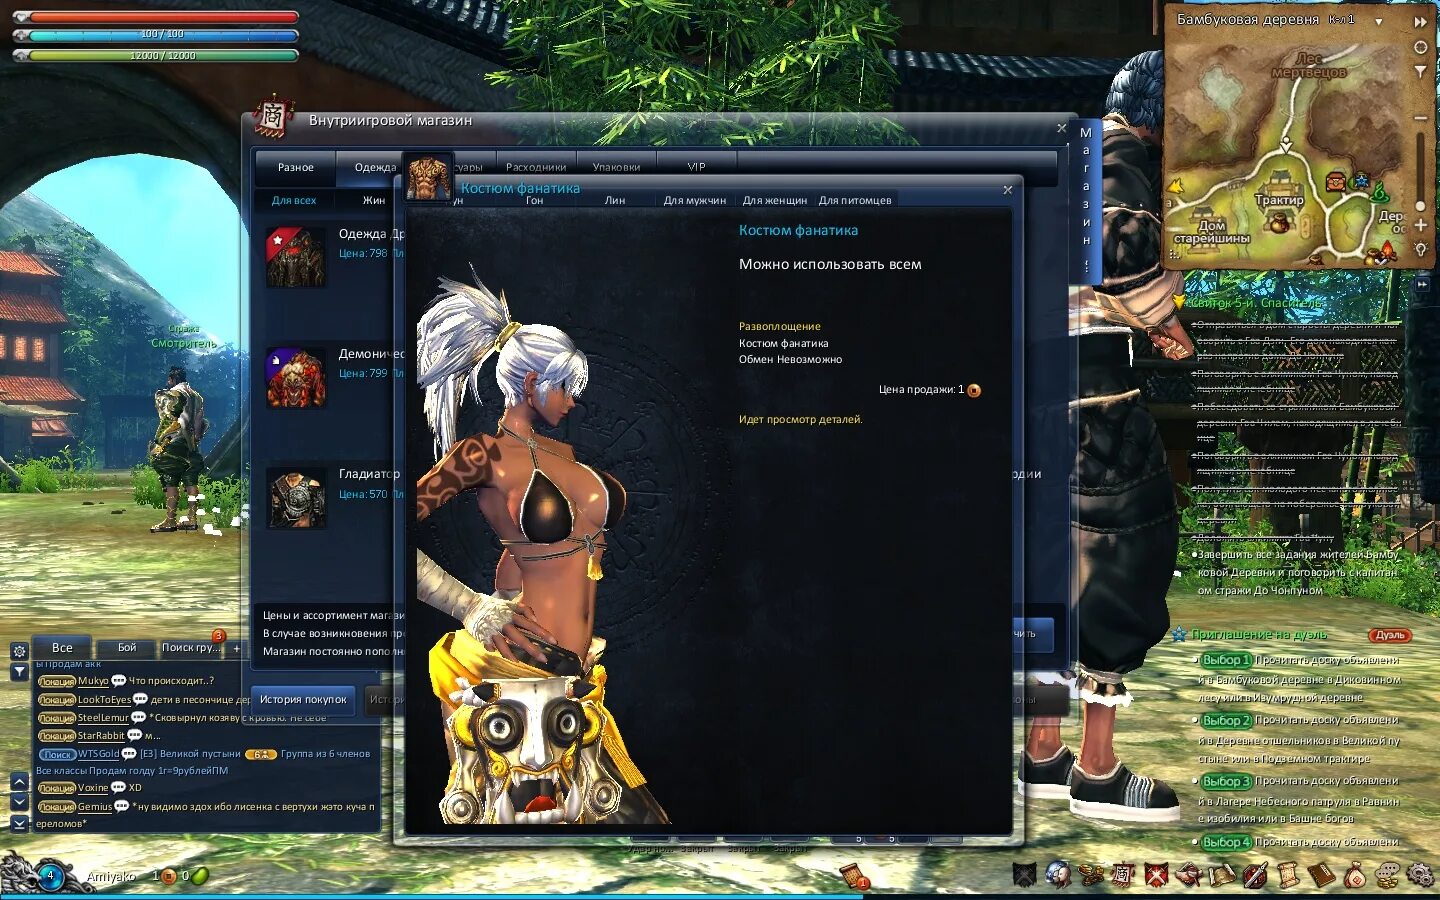 Blade and Soul 2 системные требования. Blade and Soul системные требования 2021. Blade and Soul системные требования 2020. Внутриигровой магазин Blade and Soul. Blade soul системные требования